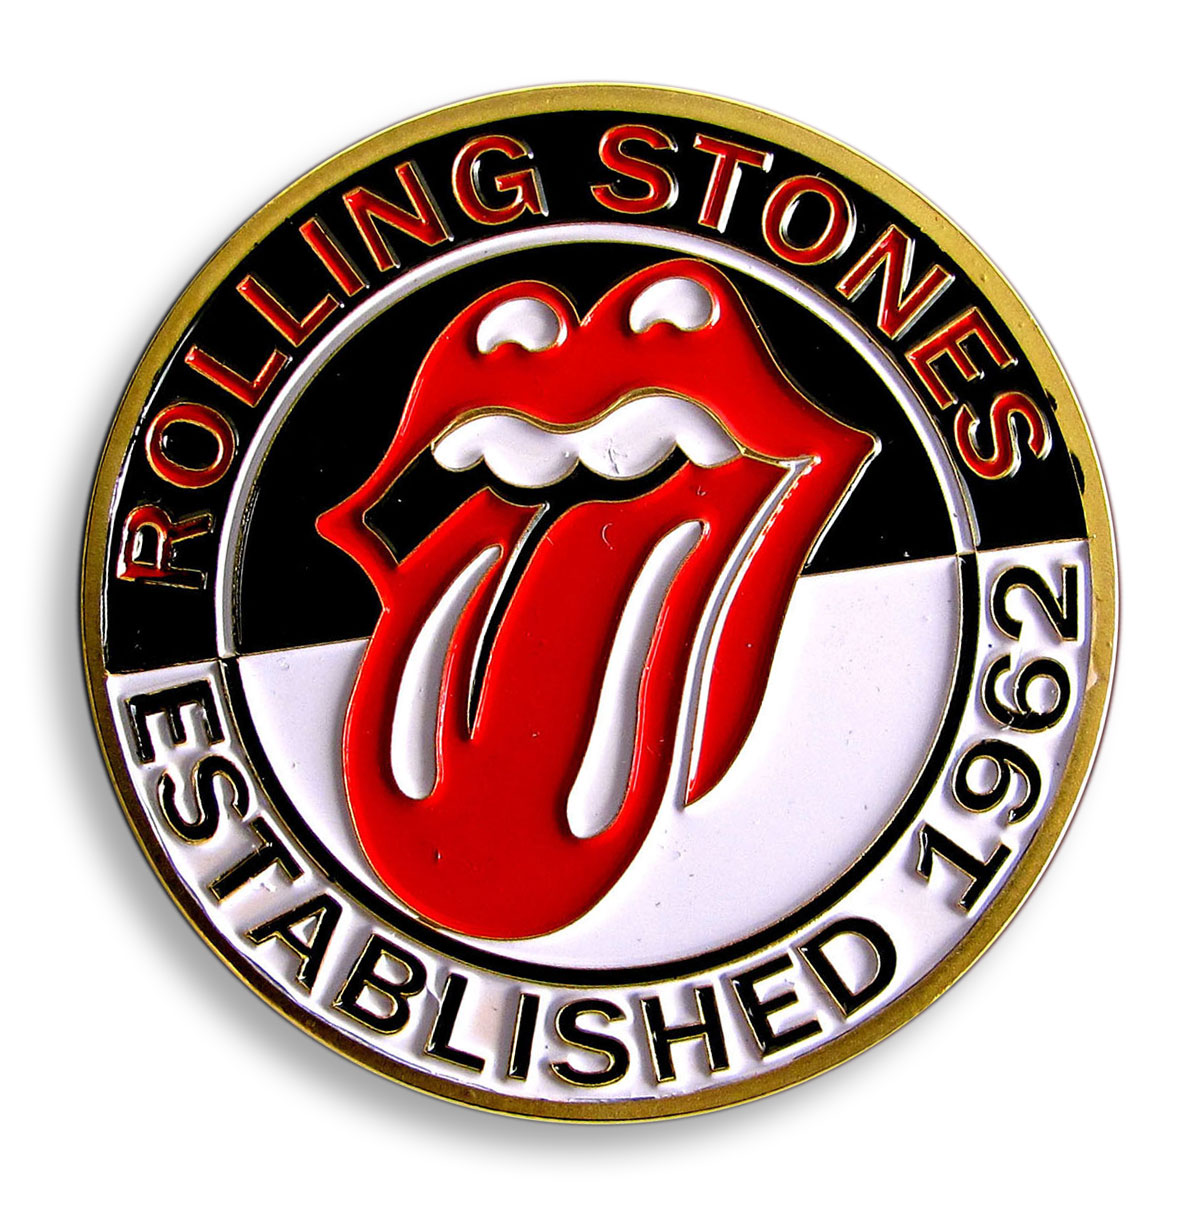 UK, The Rolling Stones, Rock Music, Mick Jagger, Rock and roll, John Pasche Logo